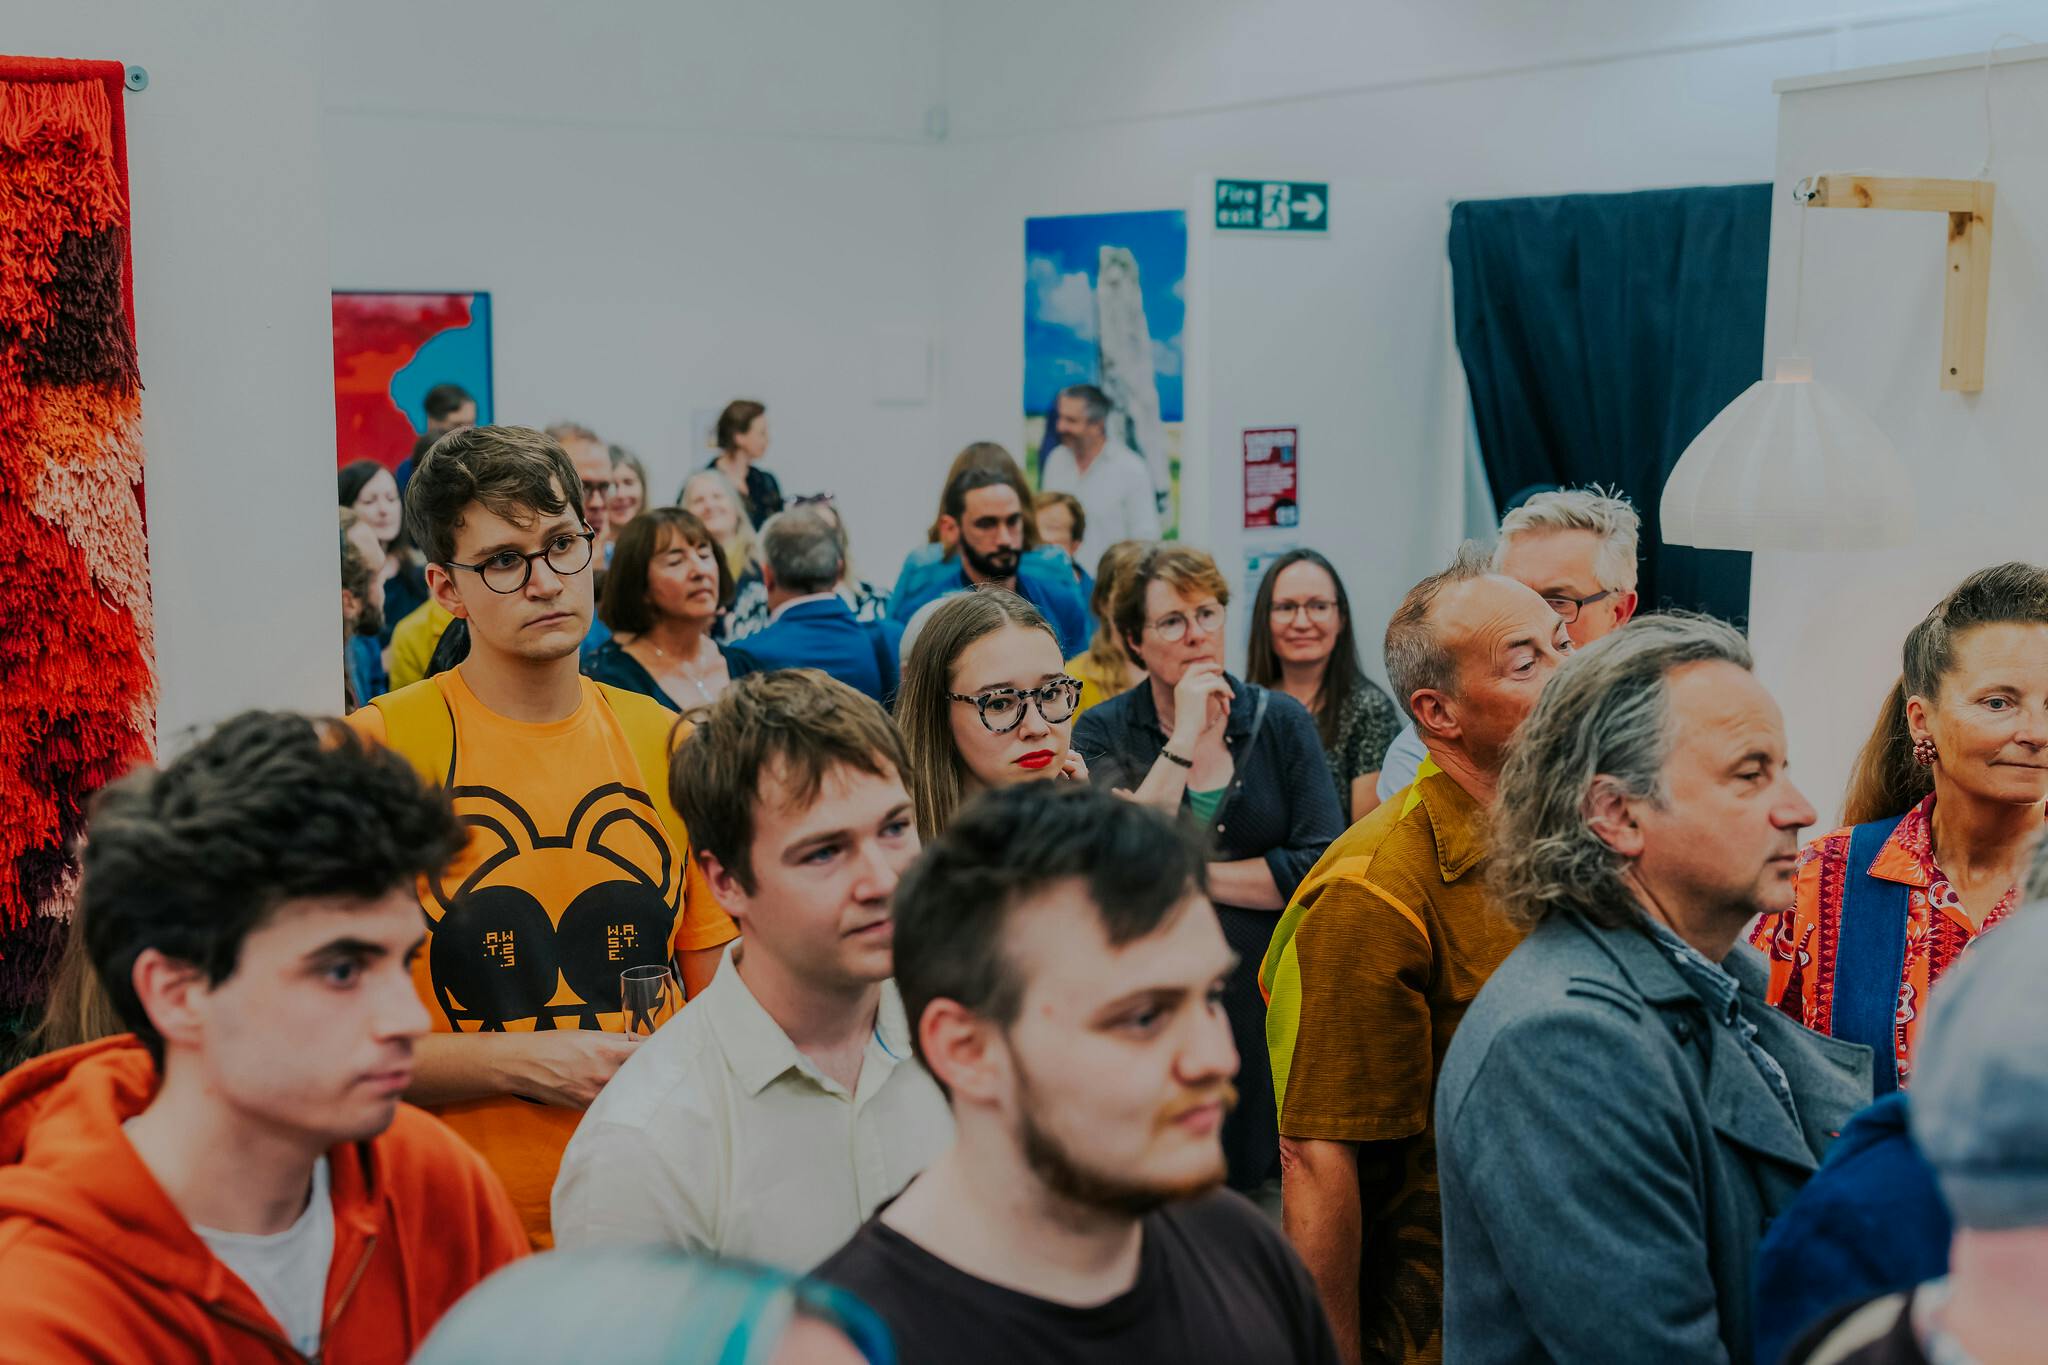 A crowd of people in the exhibition space with colourful paintings to the left and right